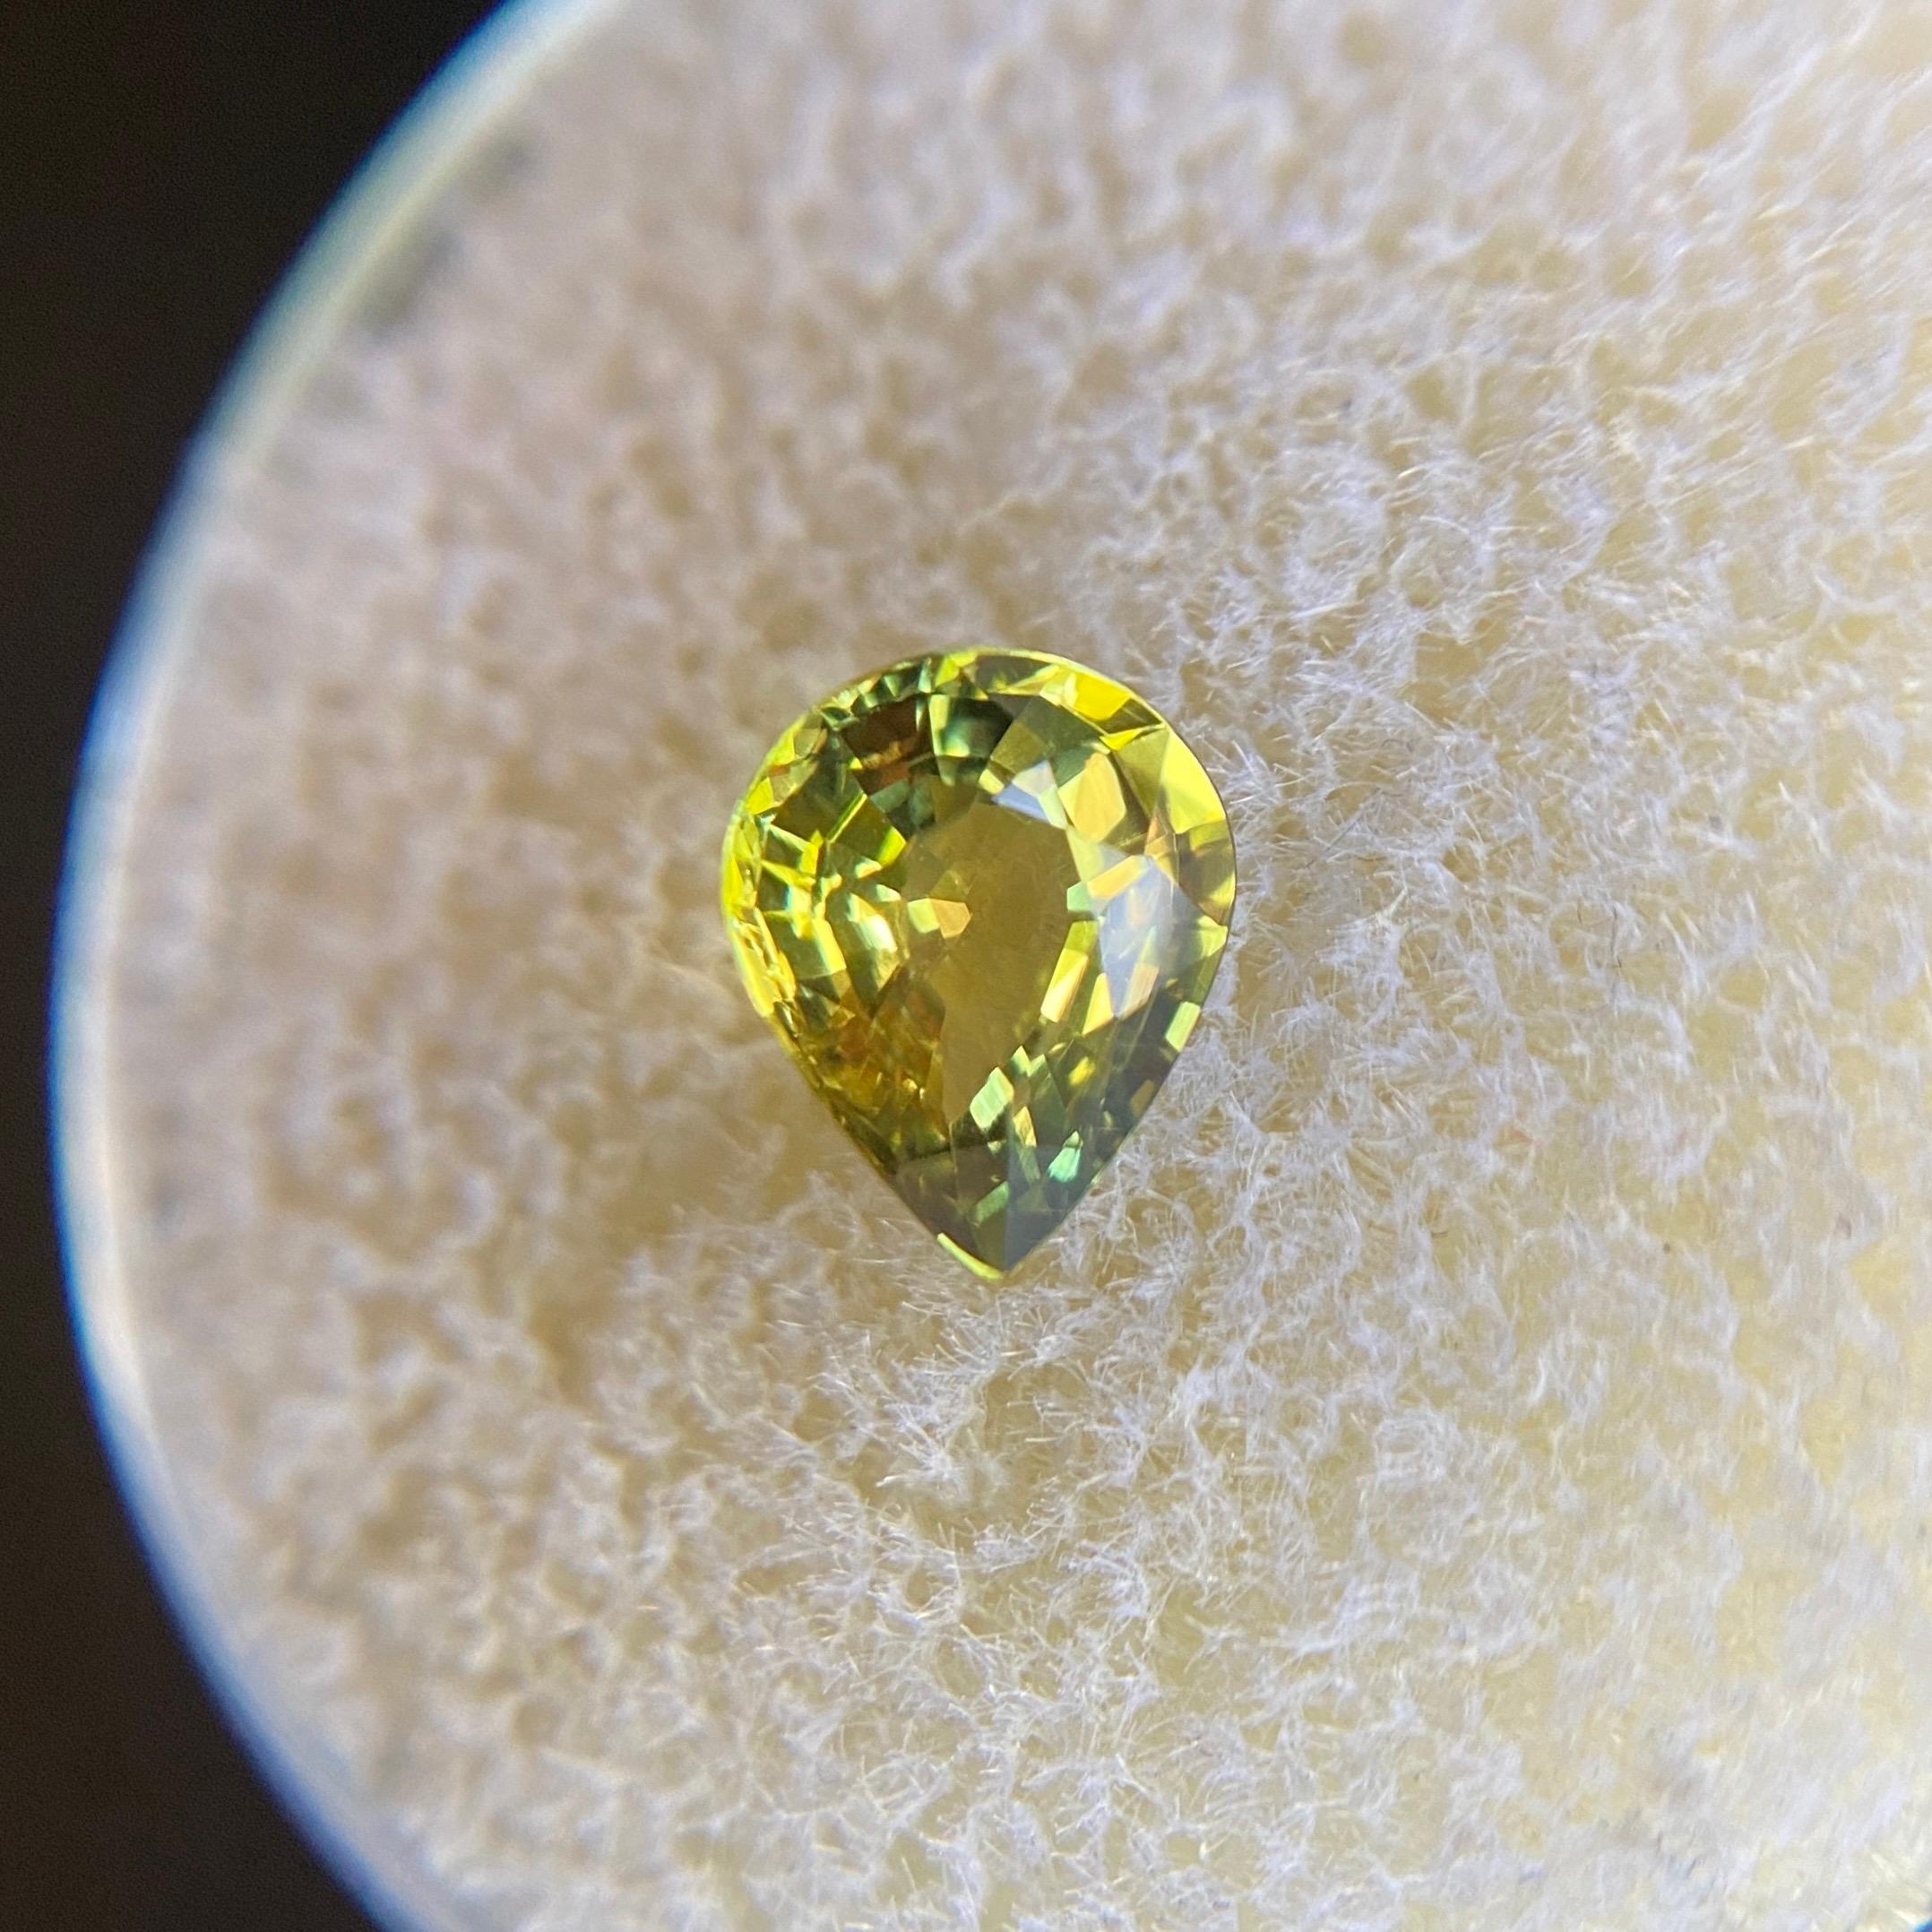 GIA Certified Untreated Yellow Sapphire Gemstone.

1.01 Carat unheated sapphire with a beautiful vivid yellow colour.
Fully certified by GIA confirming stone as natural and untreated.

Also has excellent clarity, a very clean stone with only some